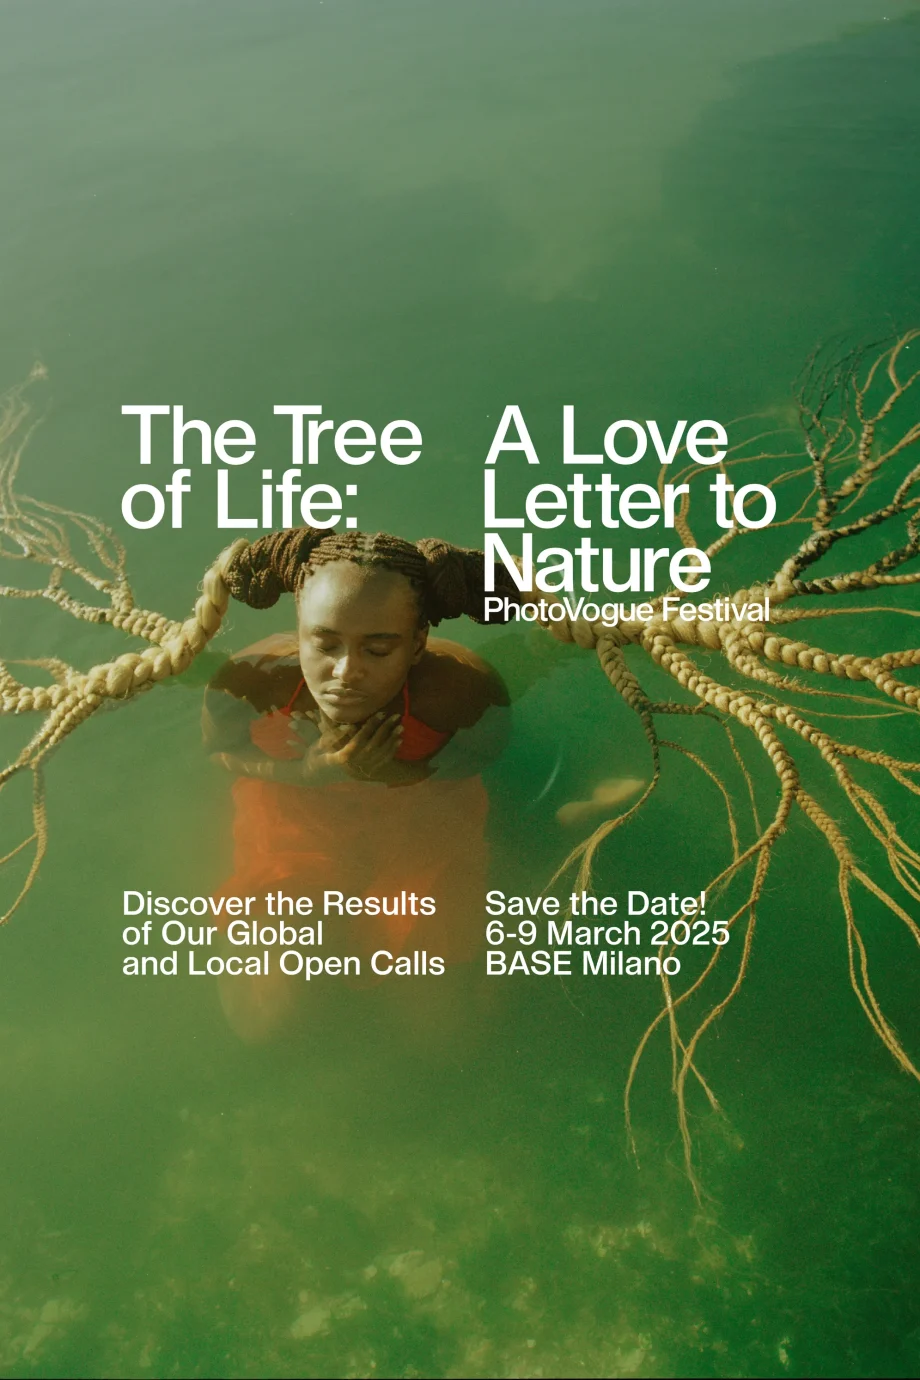 photovogue-festival-the-tree-of-life-a-love-letter-to-nature-τα-αποτελέσματα-των-παγ-320970